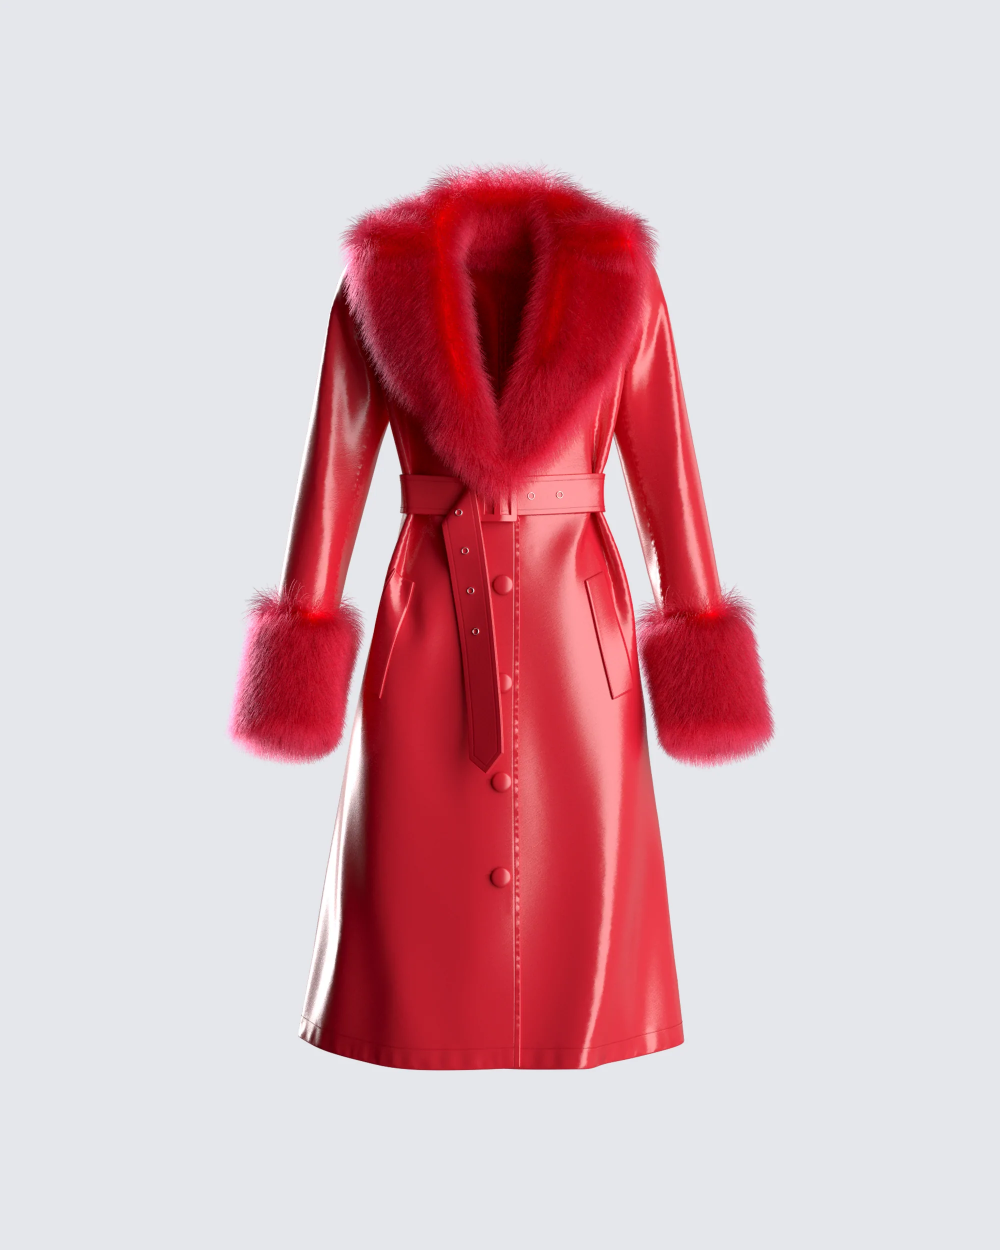 https://flyfiercefab.com/wp-content/uploads/2022/10/Finesse-Willa-Red-Fur-Trim-Leather-Coat.png